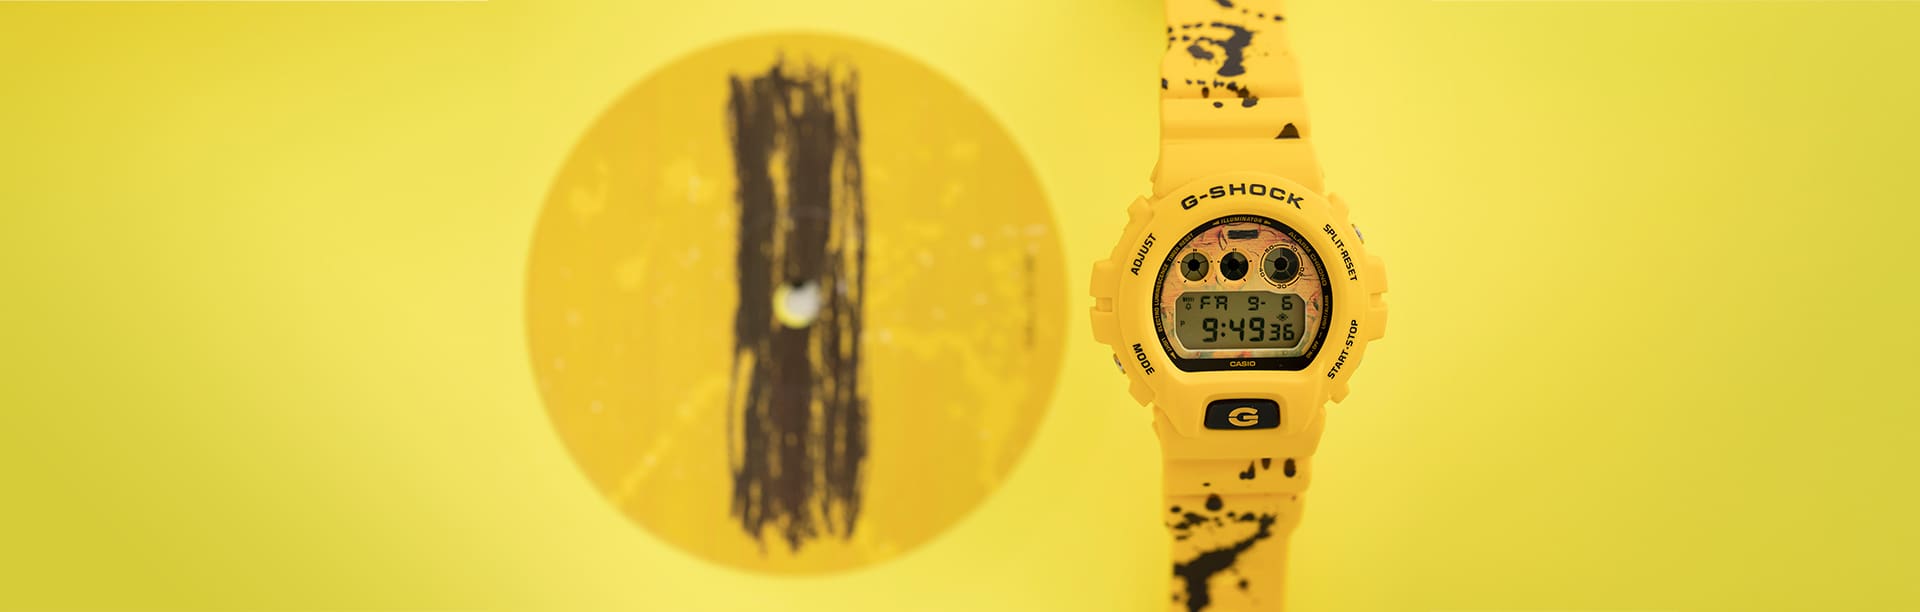 G-SHOCK DW6900ES23C-9 Ed Sheeran and Hodinkee Limited Edition Watch with record artwork